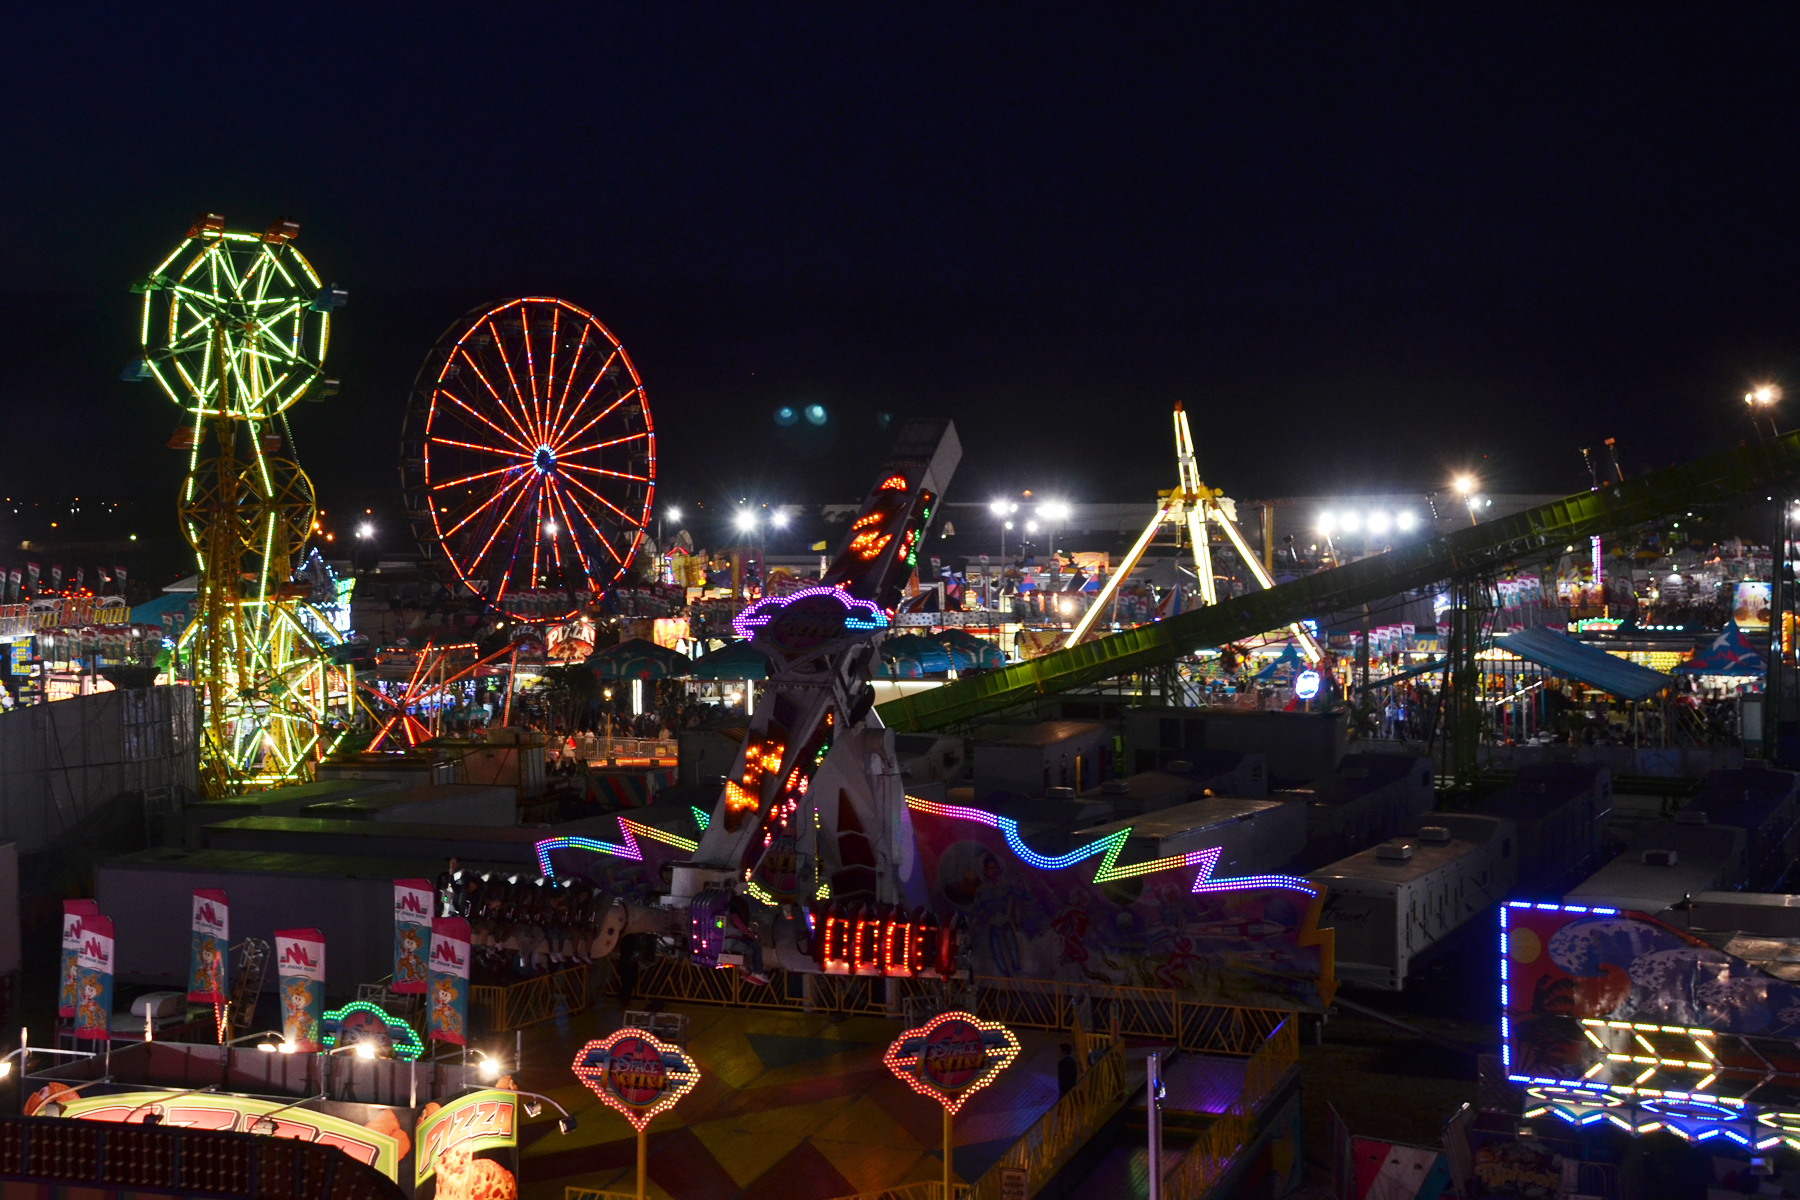 Sand, Rides, Agriculture, Food & more at the South Florida Fair